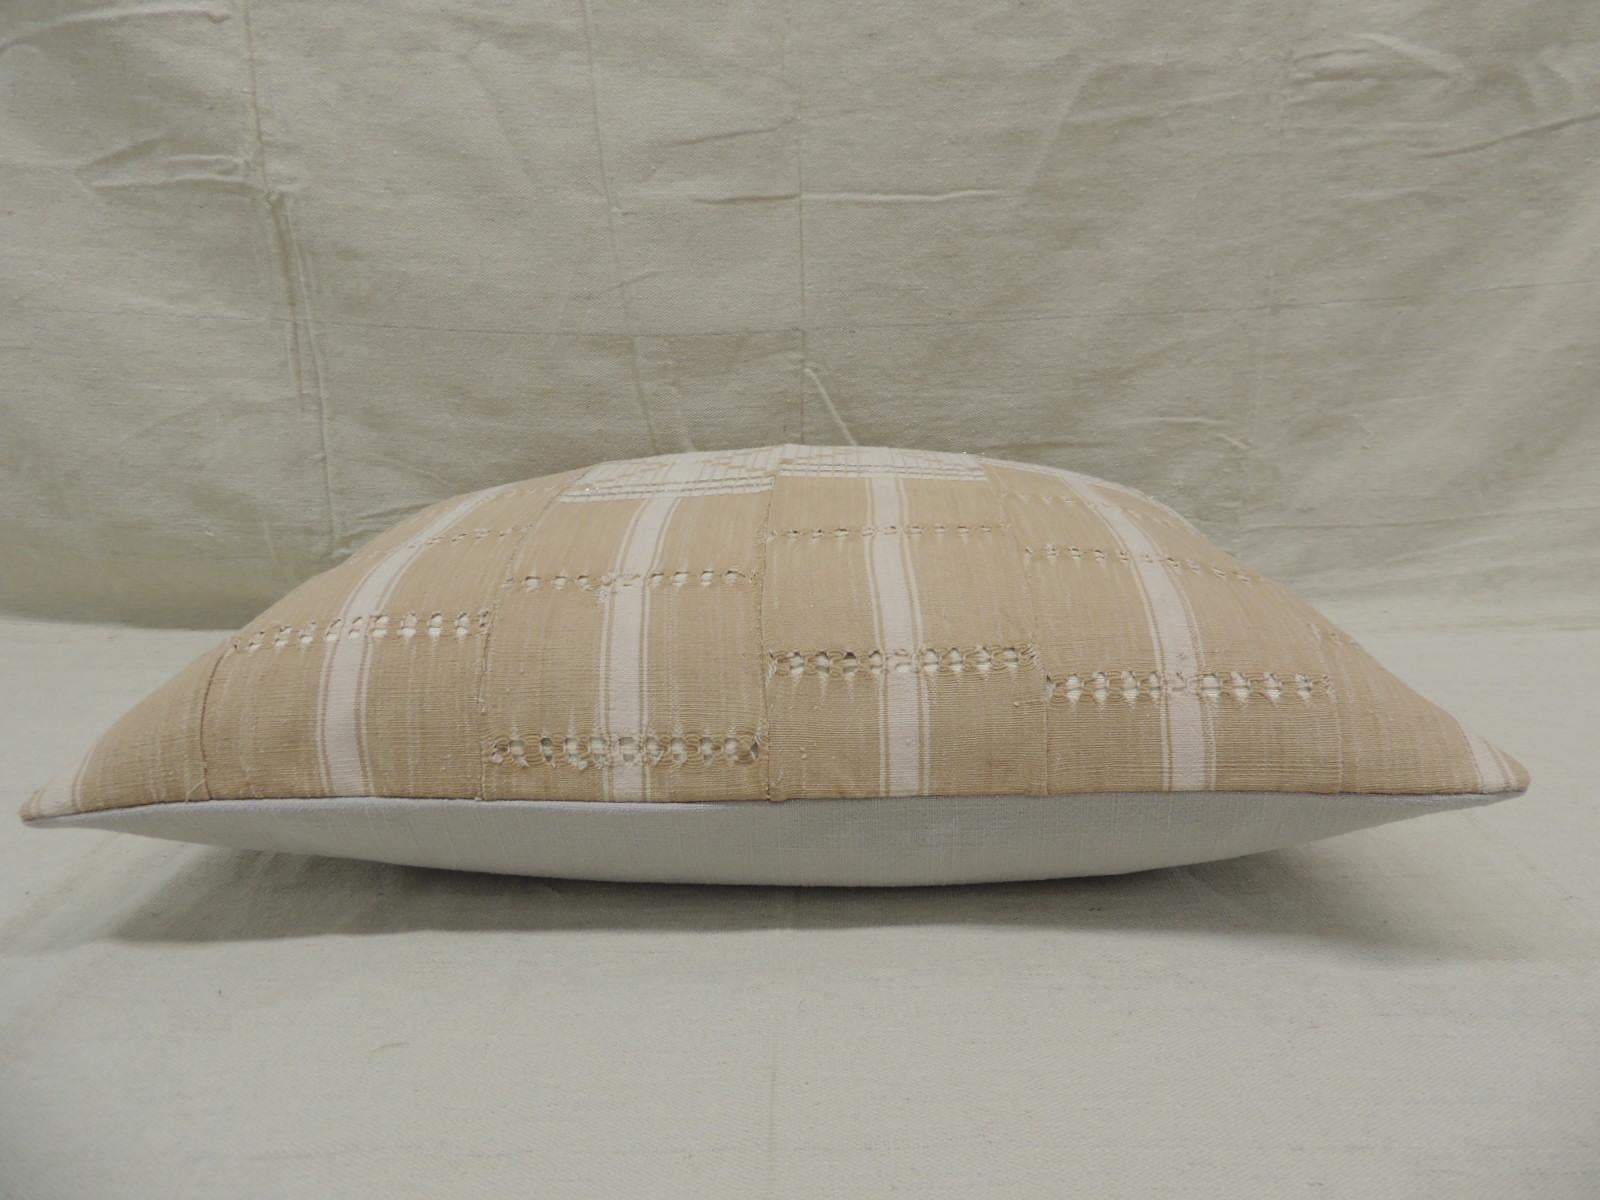 Hand-Crafted Vintage Tan and White Woven Ewe Stripweaves African Bolster Decorative Pillow